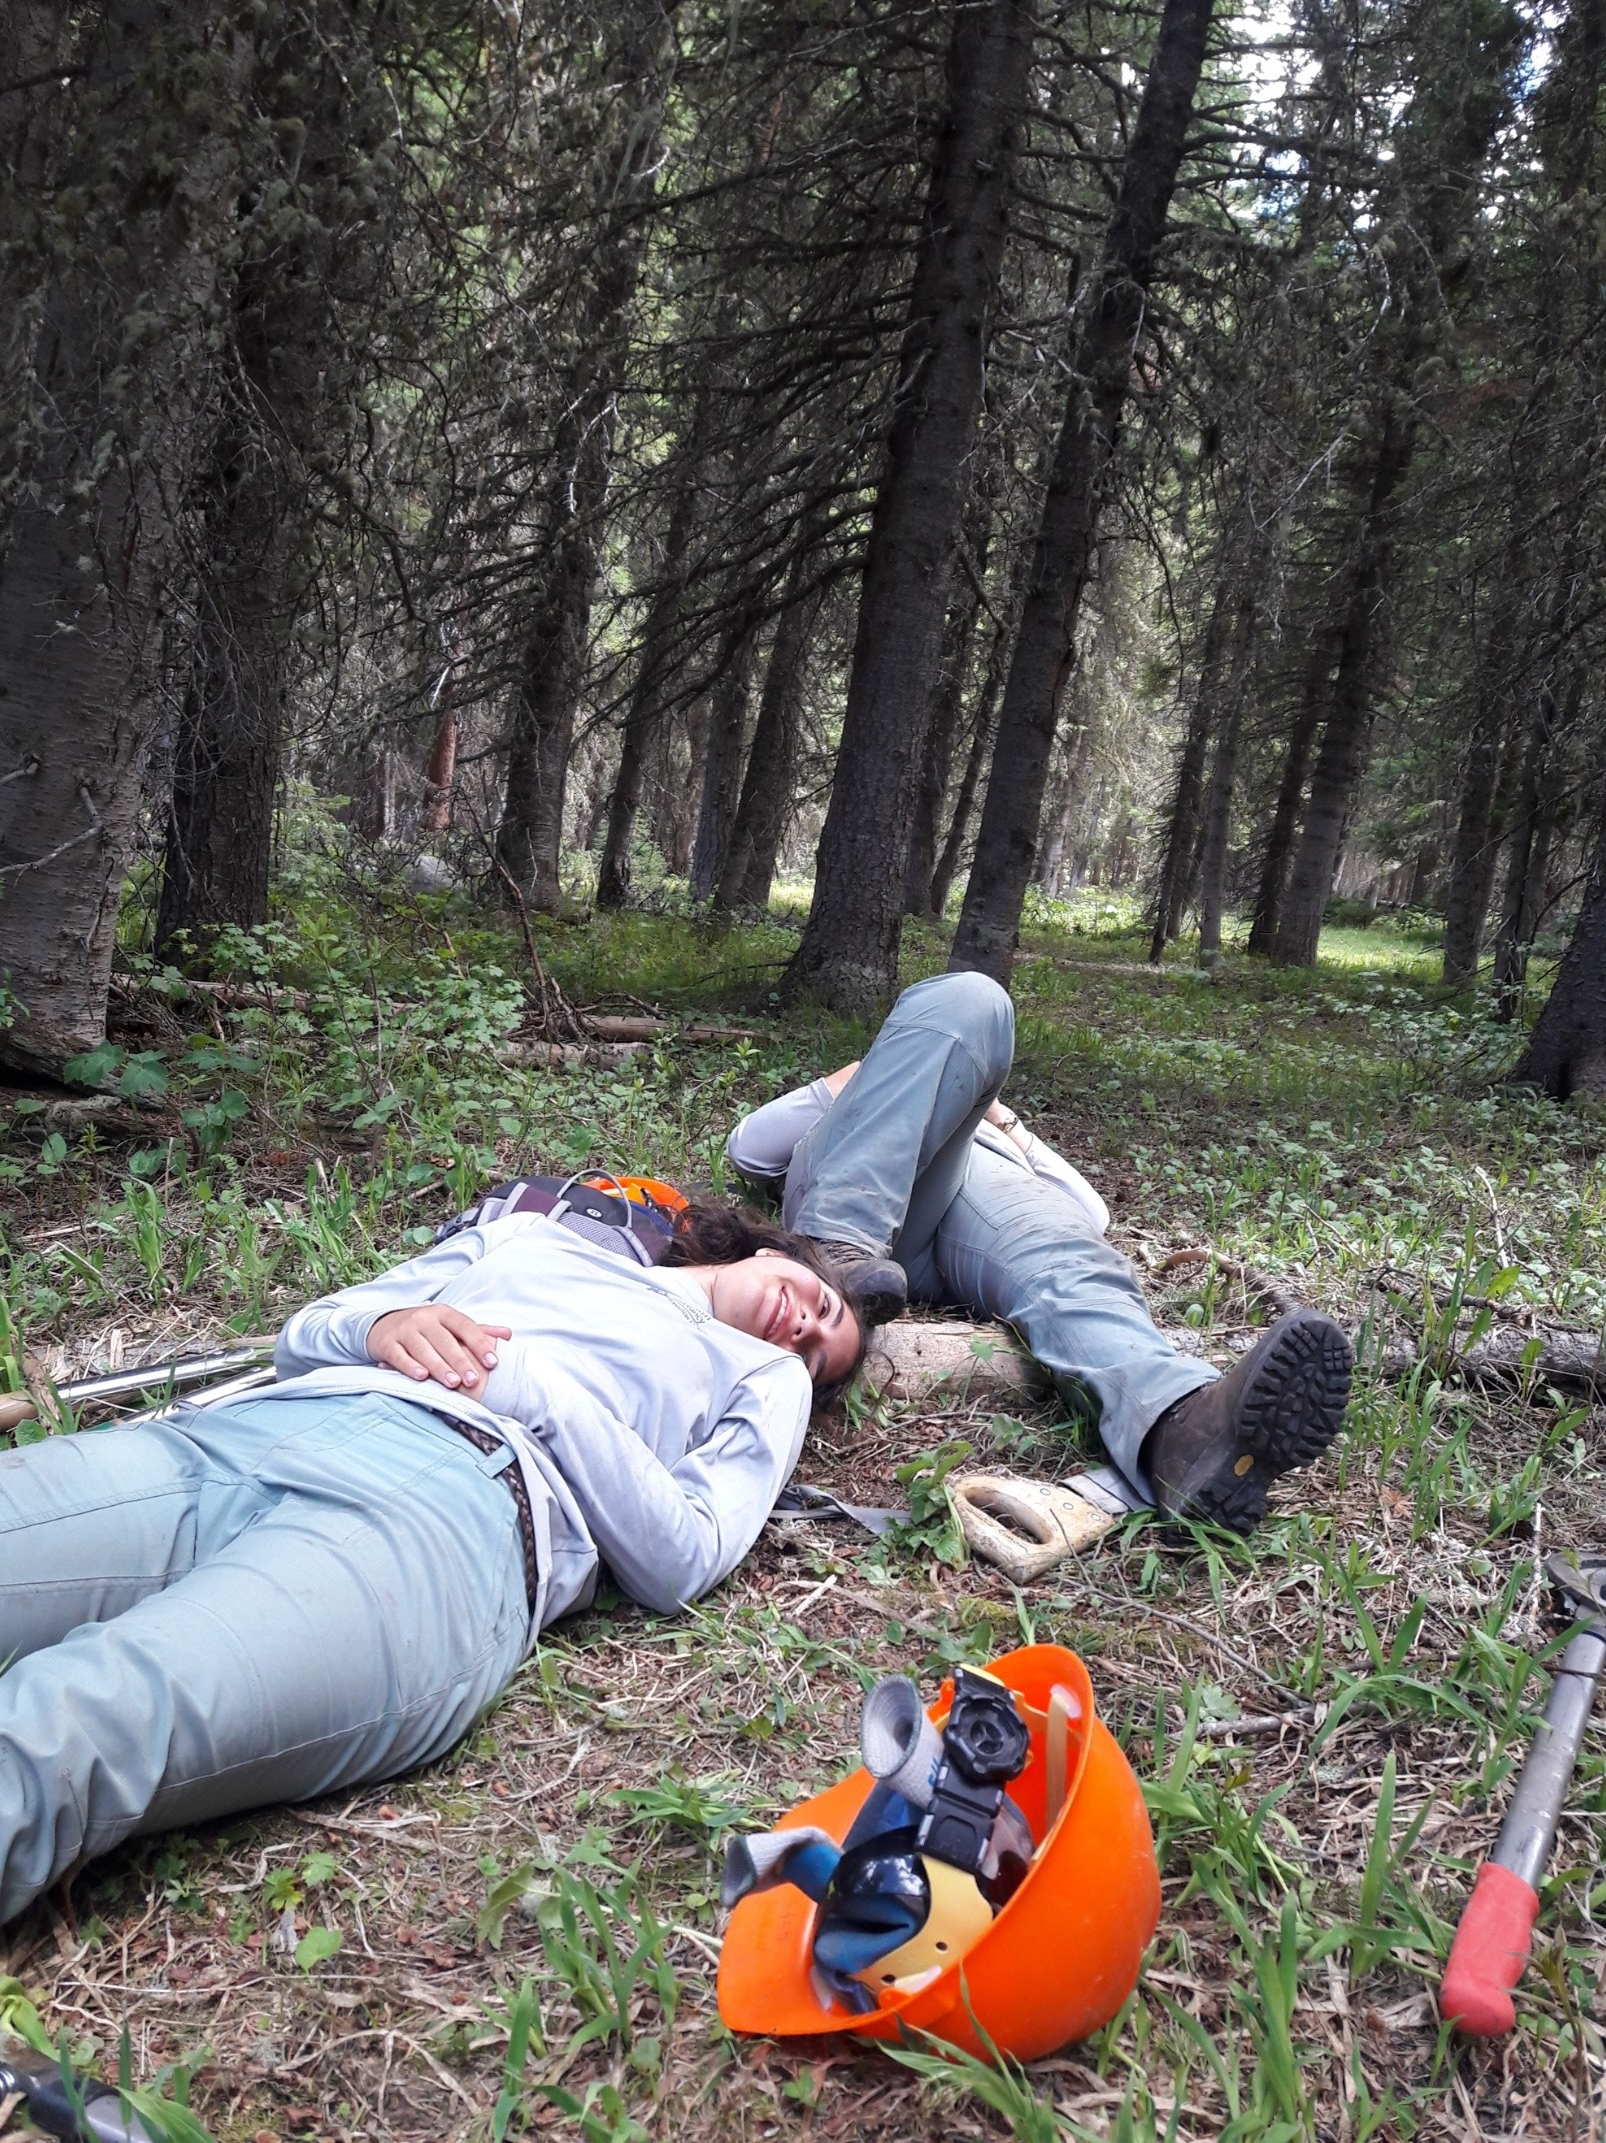 A person lying on the ground in a forest resting beneath tall pine trees.